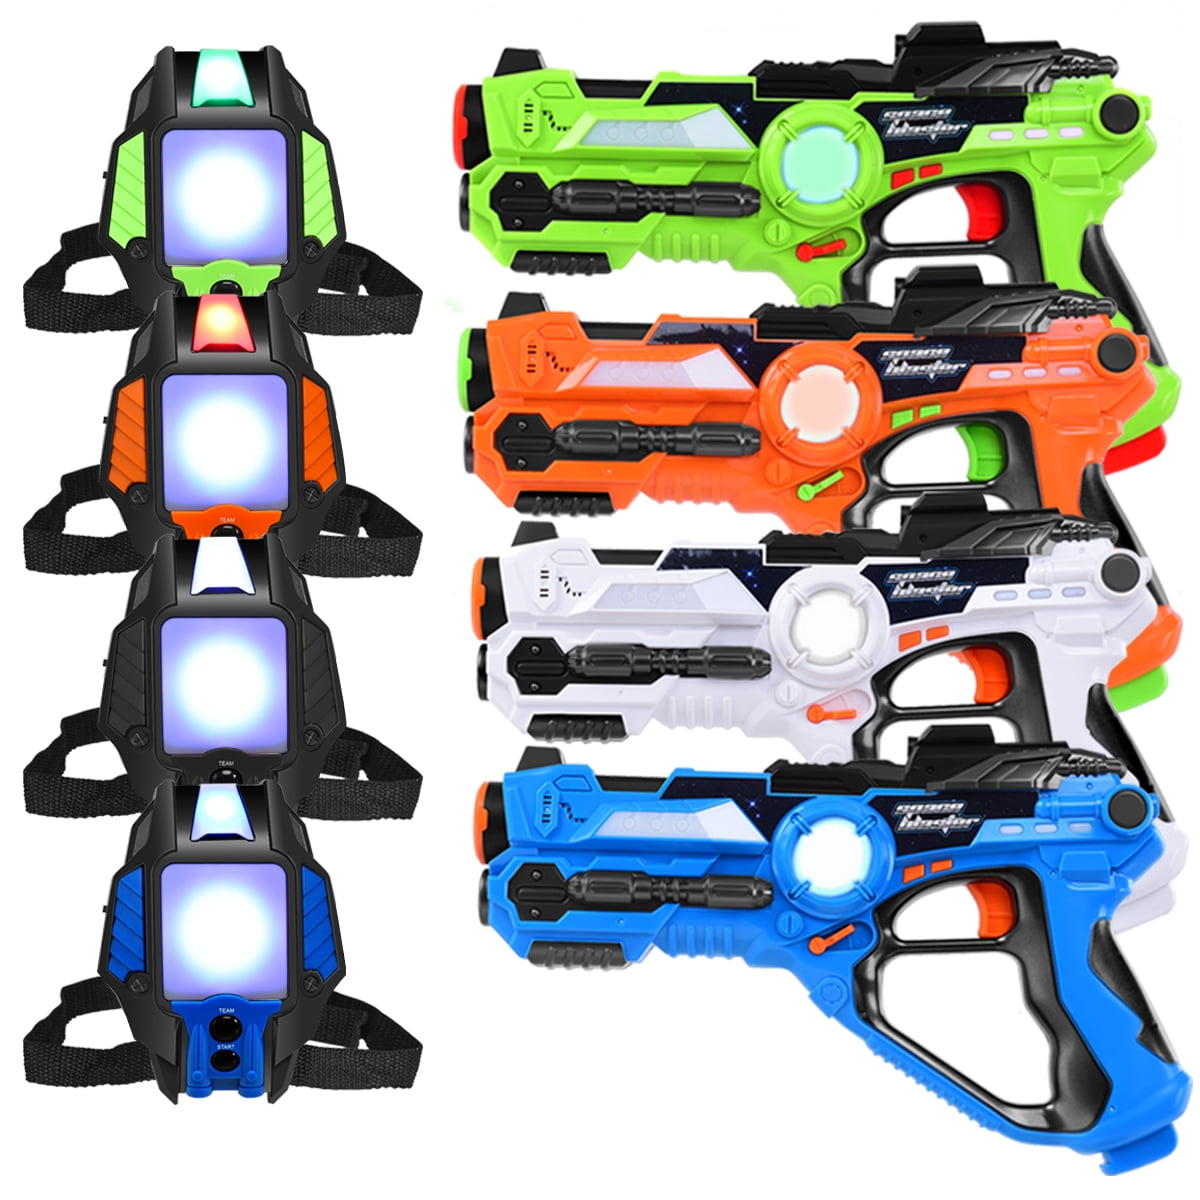 Armogear Infrared Laser Tag Blasters with Vest Set of 4 for sale online 